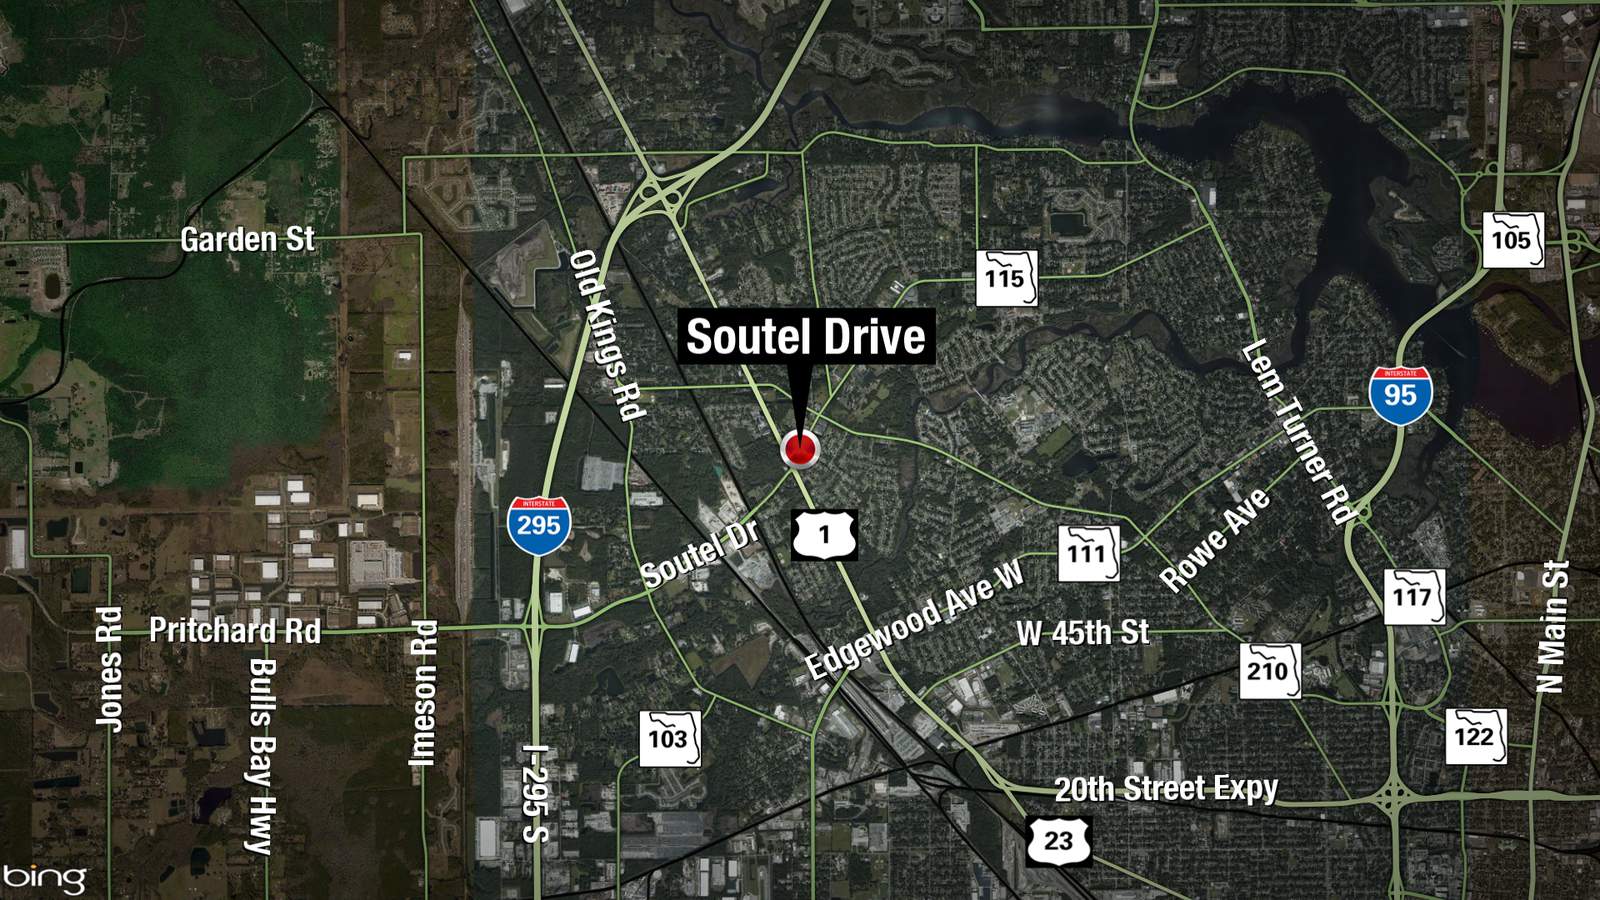 2 women hospitalized after Soutel Drive shooting, police say